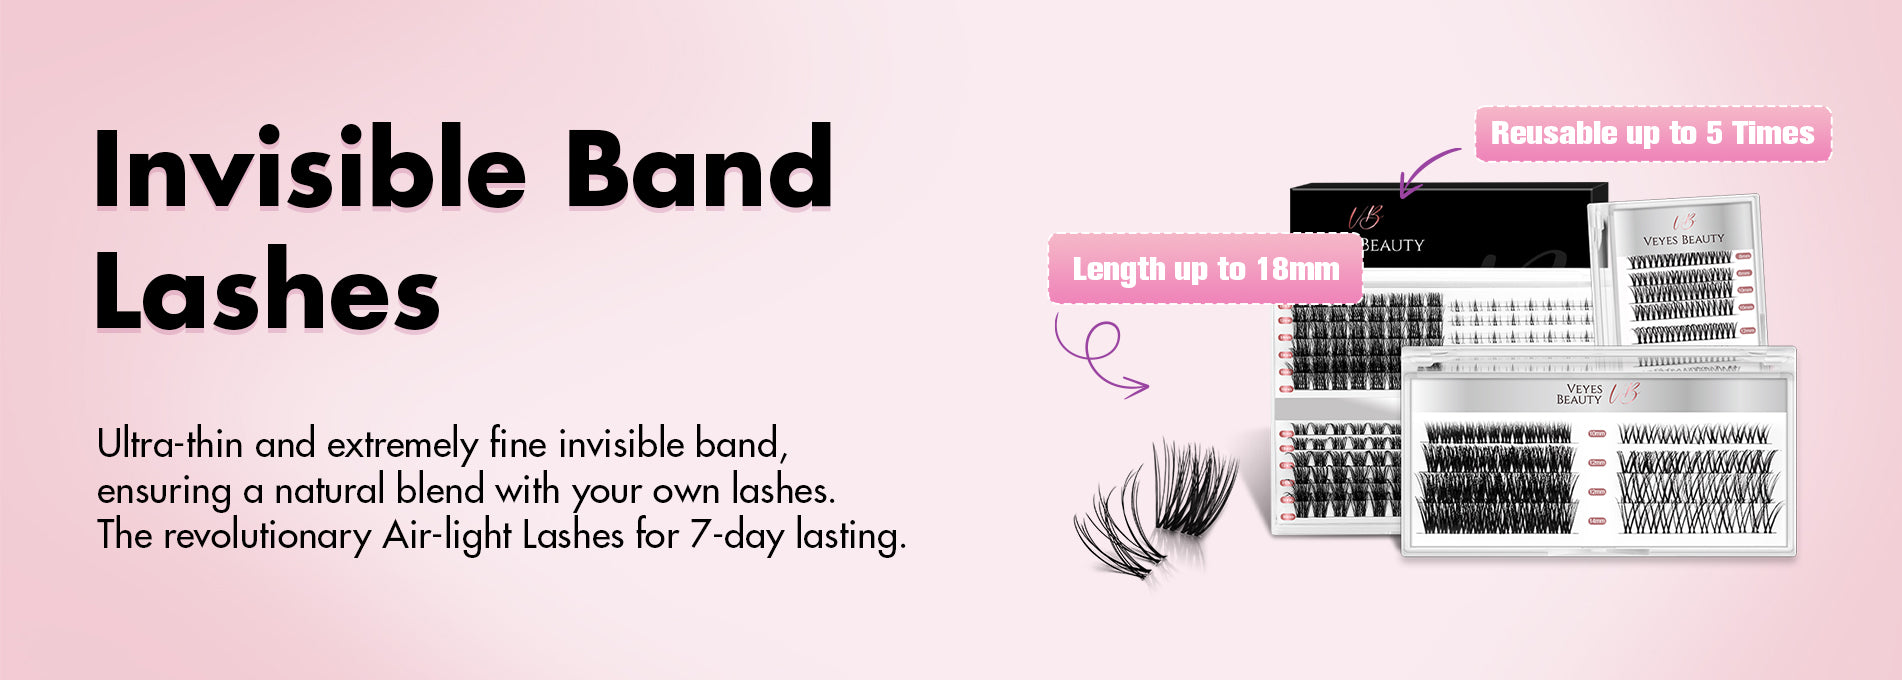 Invisible Band Lashes